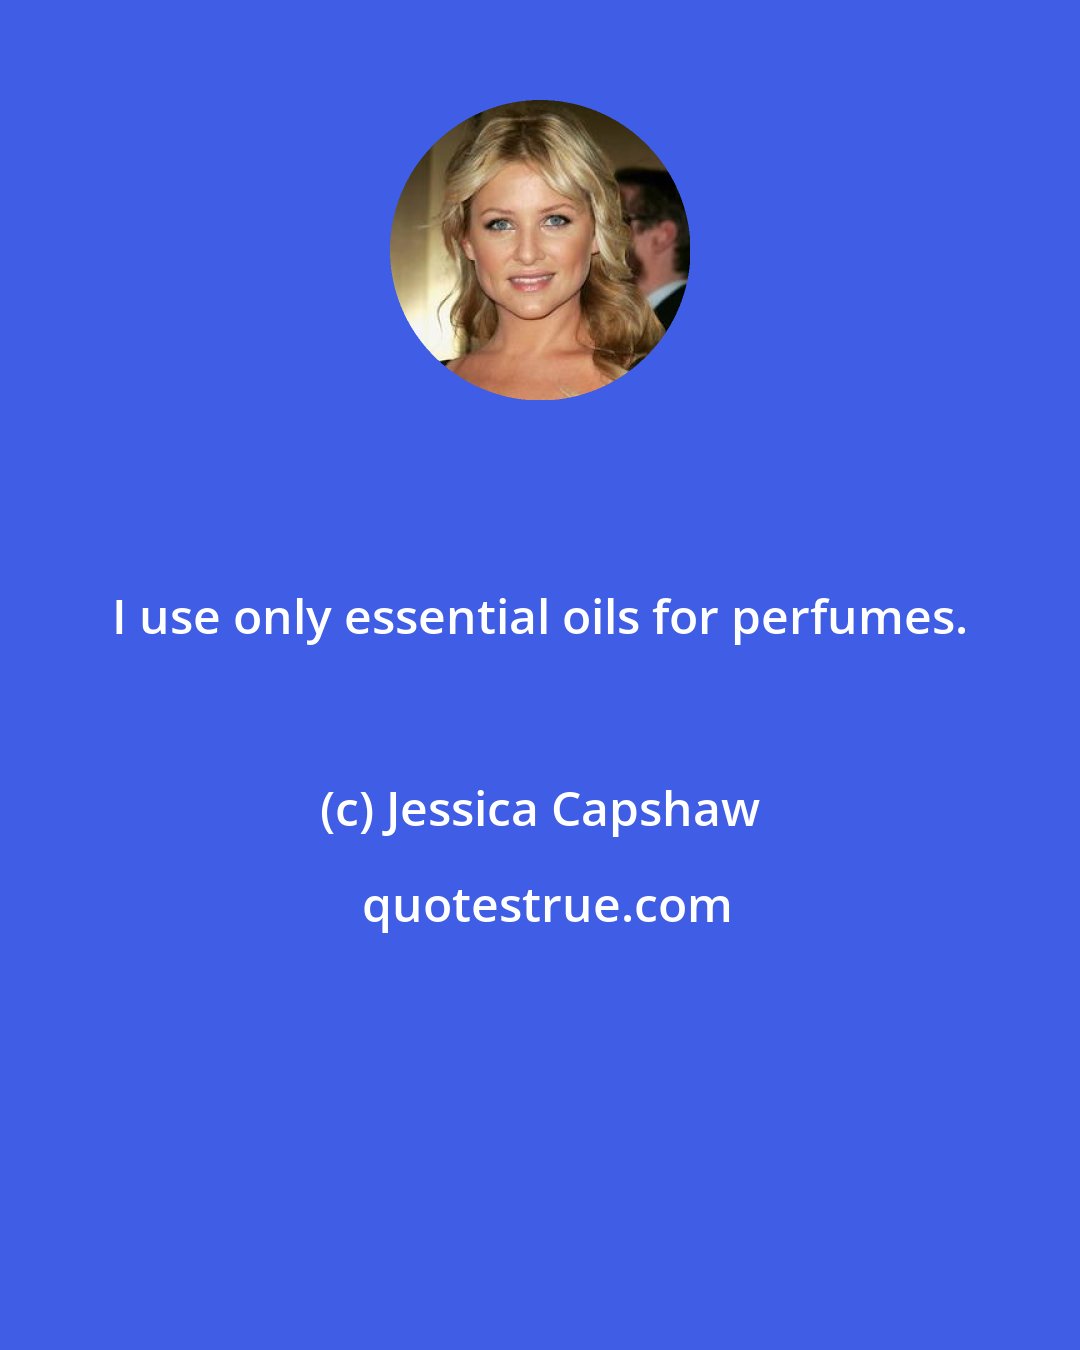 Jessica Capshaw: I use only essential oils for perfumes.